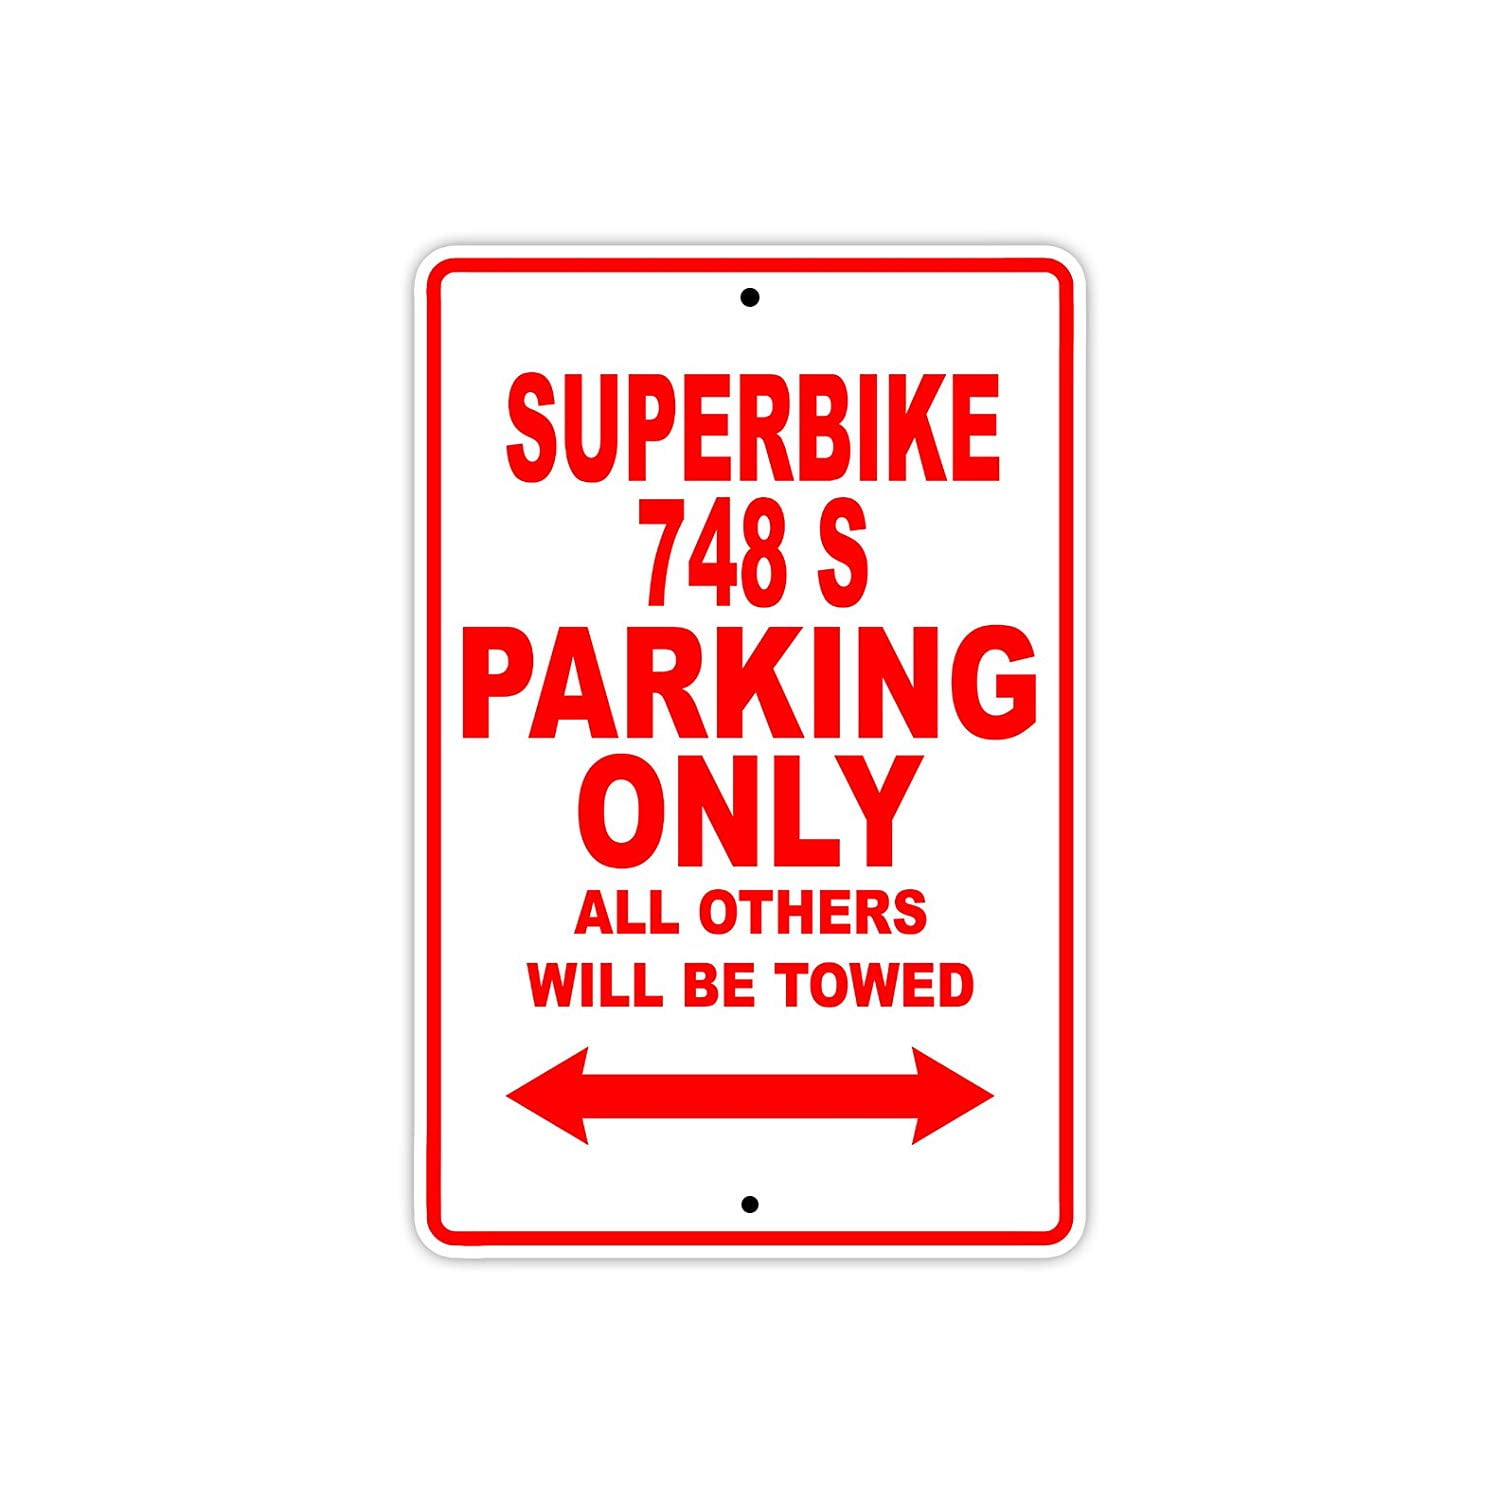 Superbike 748 S Parking Only Towed Motorcycle Bike Notice Aluminum Metal Sign 